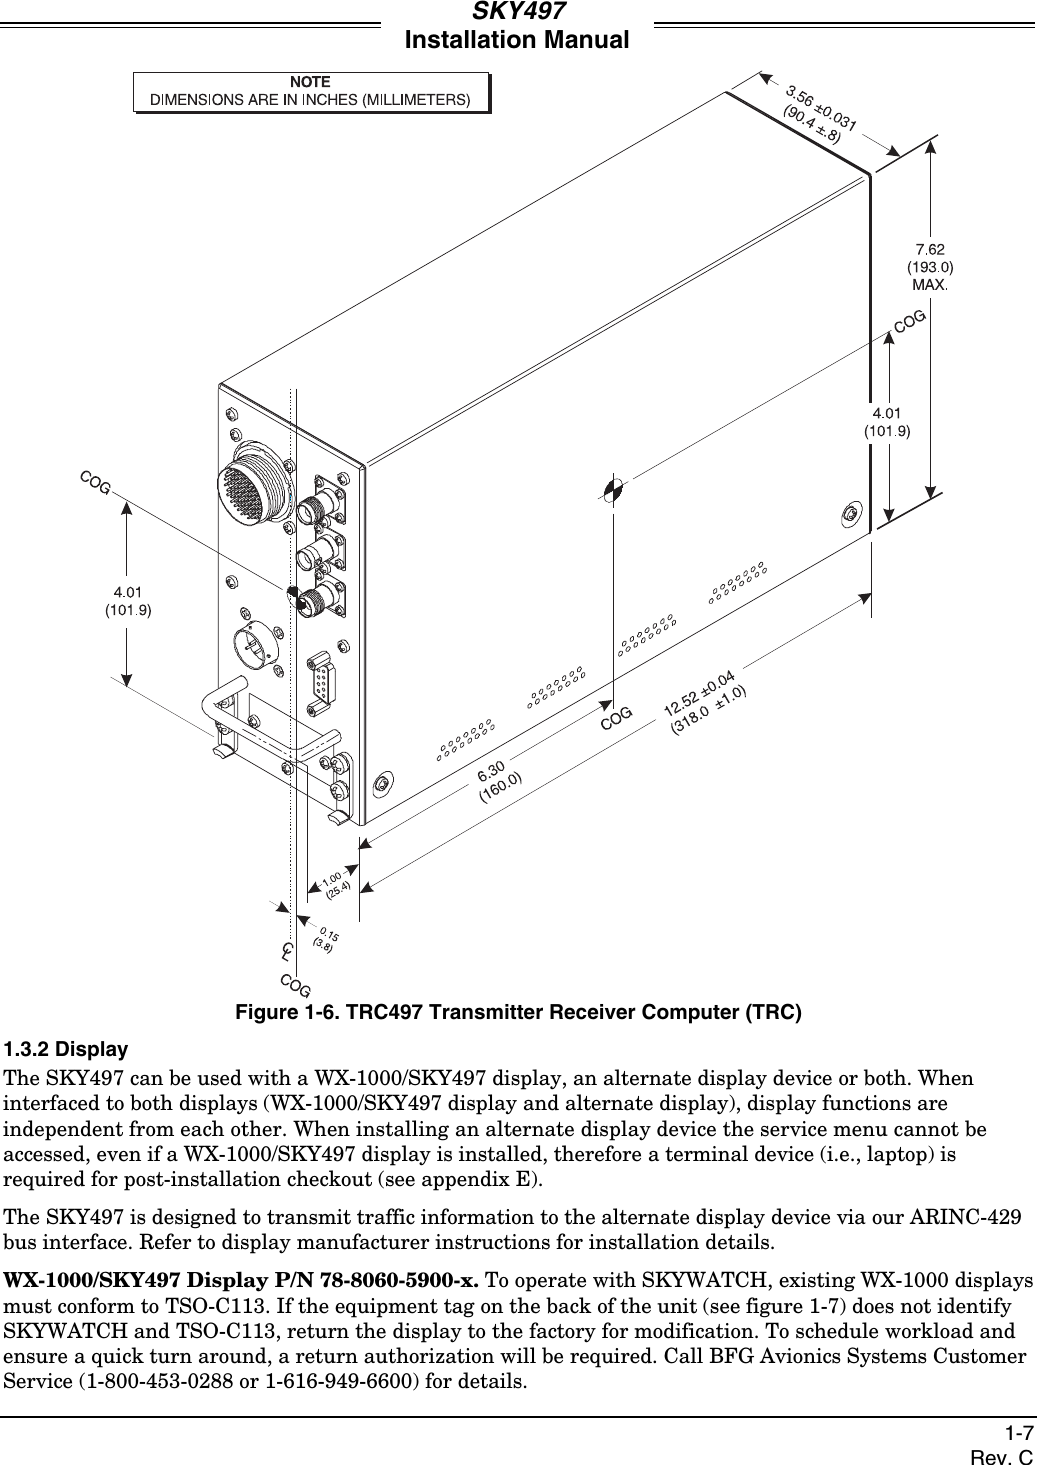 SKY497Installation Manual1-7Rev. CFigure 1-6. TRC497 Transmitter Receiver Computer (TRC)1.3.2 DisplayThe SKY497 can be used with a WX-1000/SKY497 display, an alternate display device or both. Wheninterfaced to both displays (WX-1000/SKY497 display and alternate display), display functions areindependent from each other. When installing an alternate display device the service menu cannot beaccessed, even if a WX-1000/SKY497 display is installed, therefore a terminal device (i.e., laptop) isrequired for post-installation checkout (see appendix E).The SKY497 is designed to transmit traffic information to the alternate display device via our ARINC-429bus interface. Refer to display manufacturer instructions for installation details.WX-1000/SKY497 Display P/N 78-8060-5900-x. To operate with SKYWATCH, existing WX-1000 displaysmust conform to TSO-C113. If the equipment tag on the back of the unit (see figure 1-7) does not identifySKYWATCH and TSO-C113, return the display to the factory for modification. To schedule workload andensure a quick turn around, a return authorization will be required. Call BFG Avionics Systems CustomerService (1-800-453-0288 or 1-616-949-6600) for details.